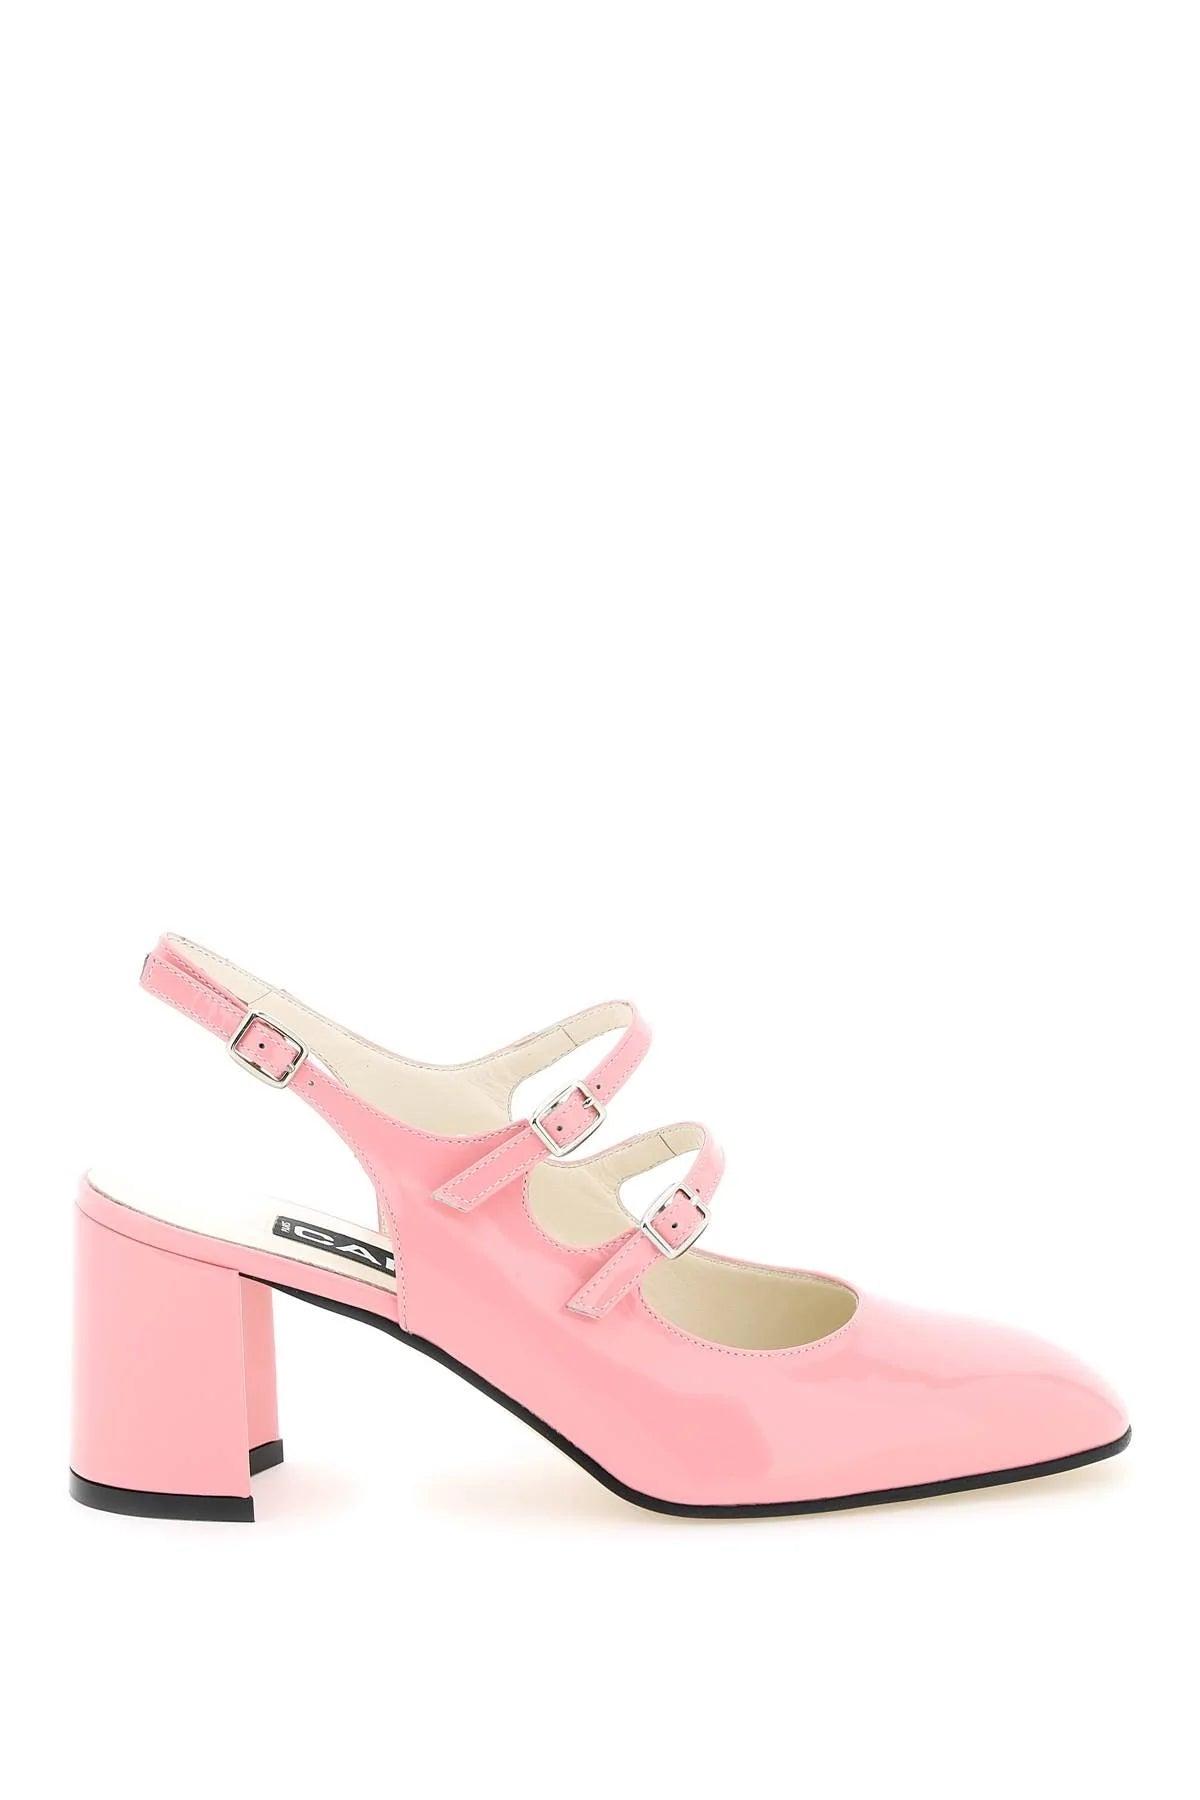 CAREL Patent Leather Slingback Mary Jane in Pink | Lyst UK